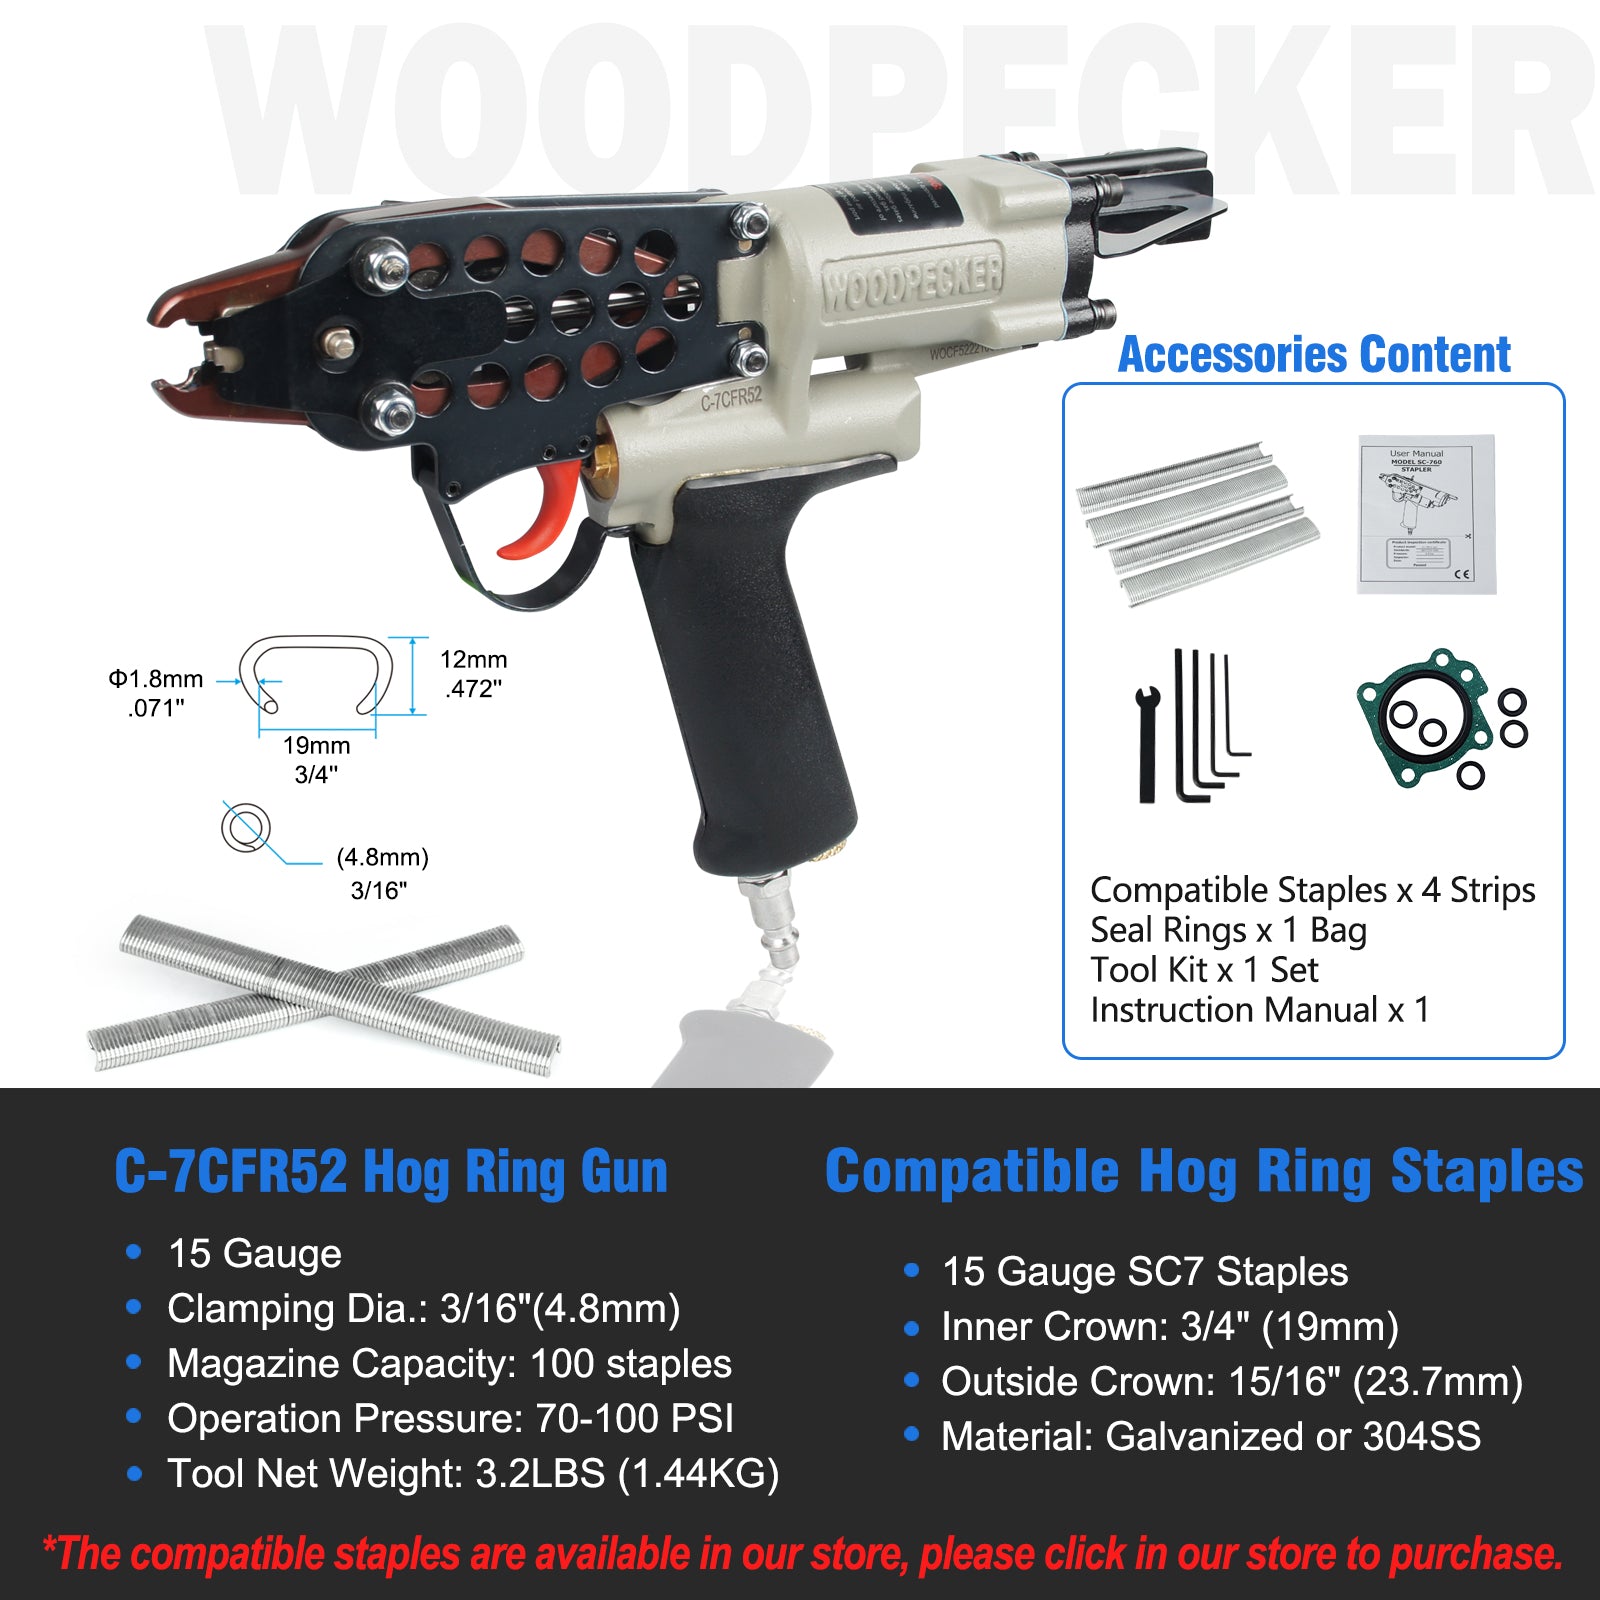 WOODPECKER C-7CFR52 Air Hog Ring Gun with Variable Speed Control, 15 Gauge 3/4’’ (19mm) Crown, Pneumatic Hog Ring Plier Tool for Fencing, Cages, Fastening